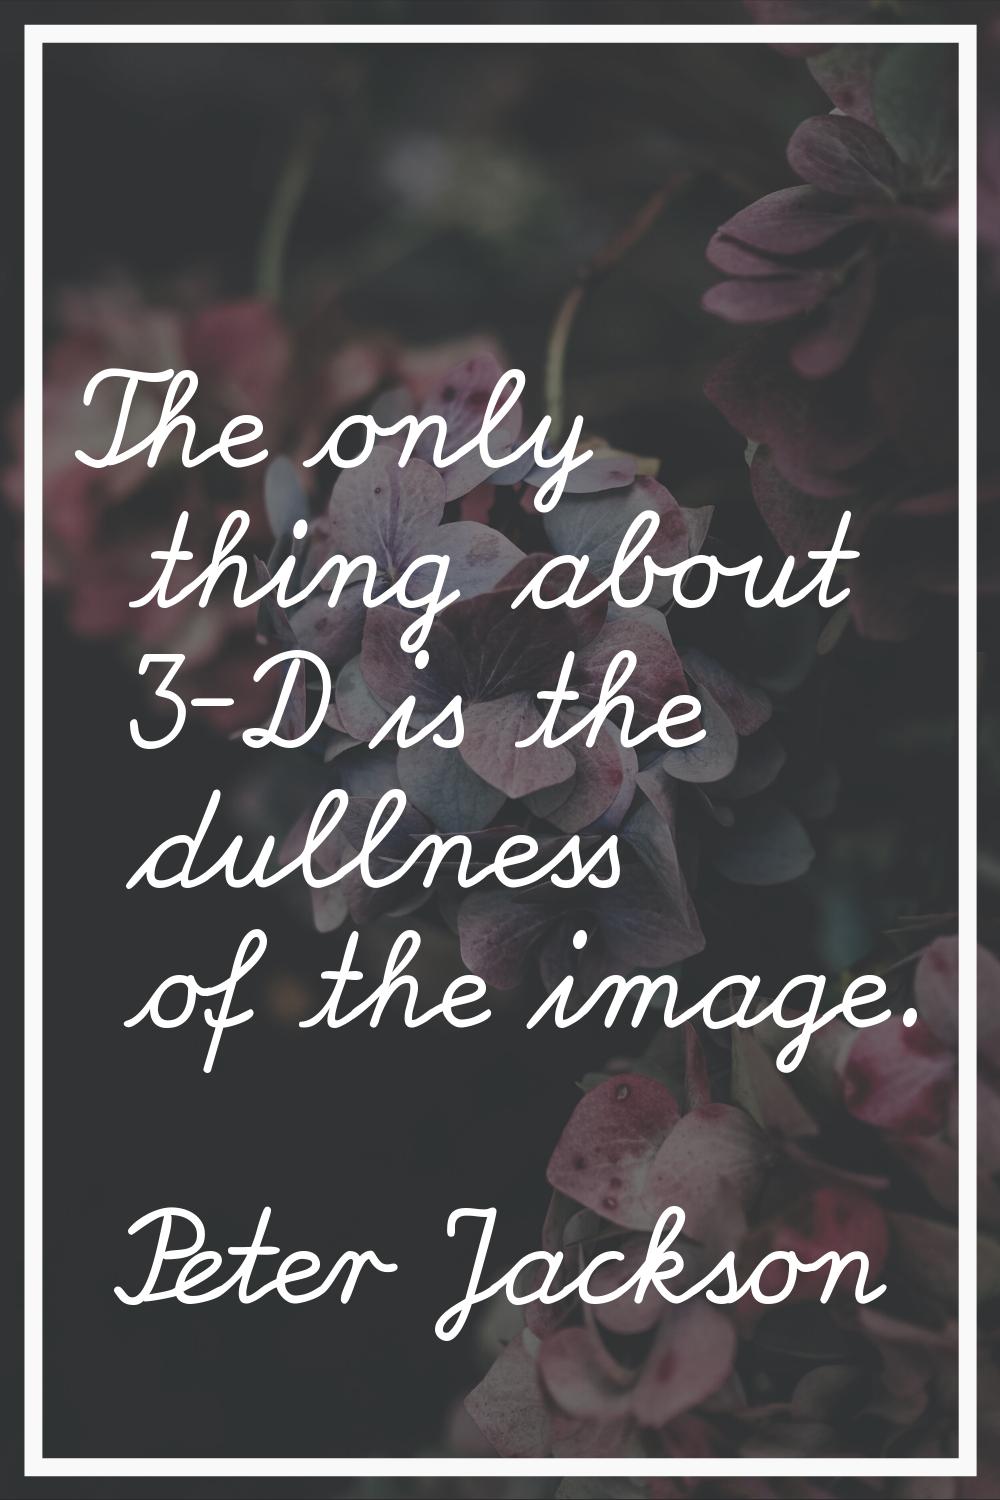 The only thing about 3-D is the dullness of the image.